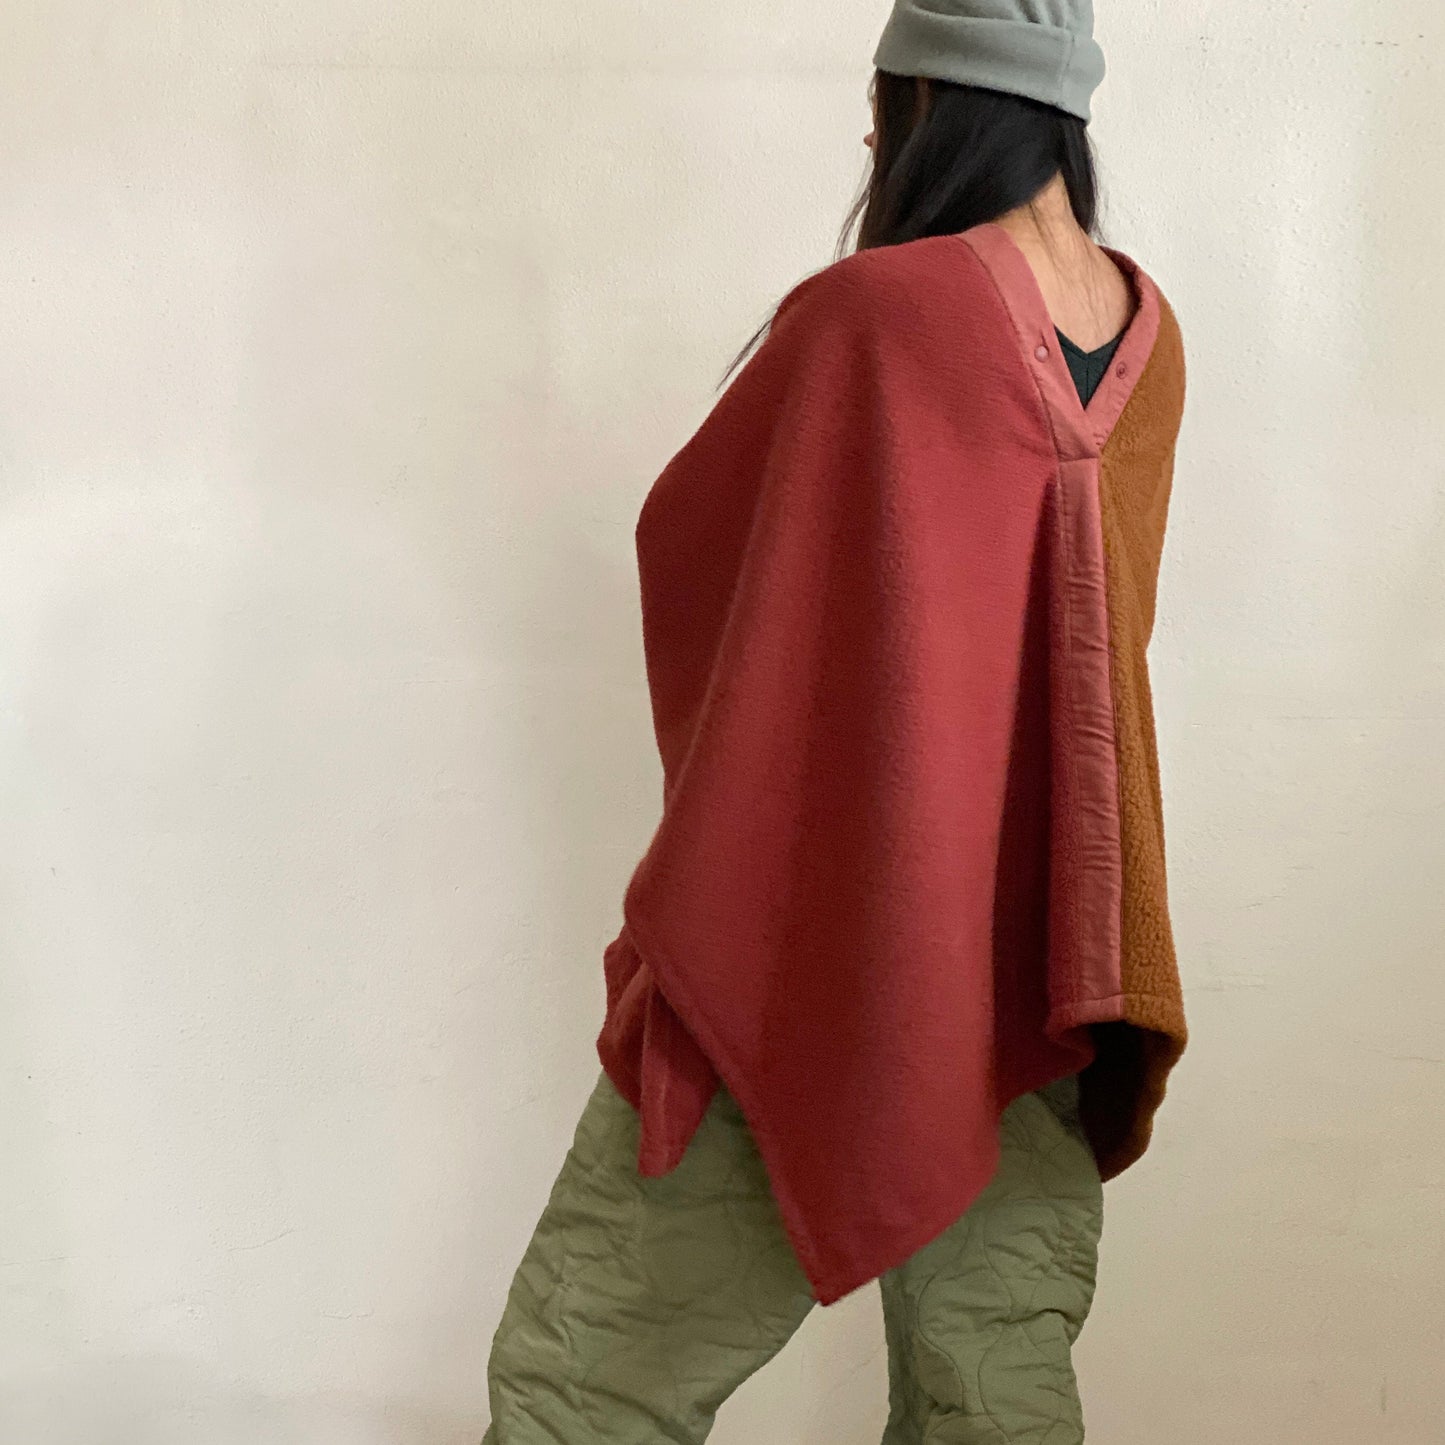 Flying Poncho blanket - Indian red